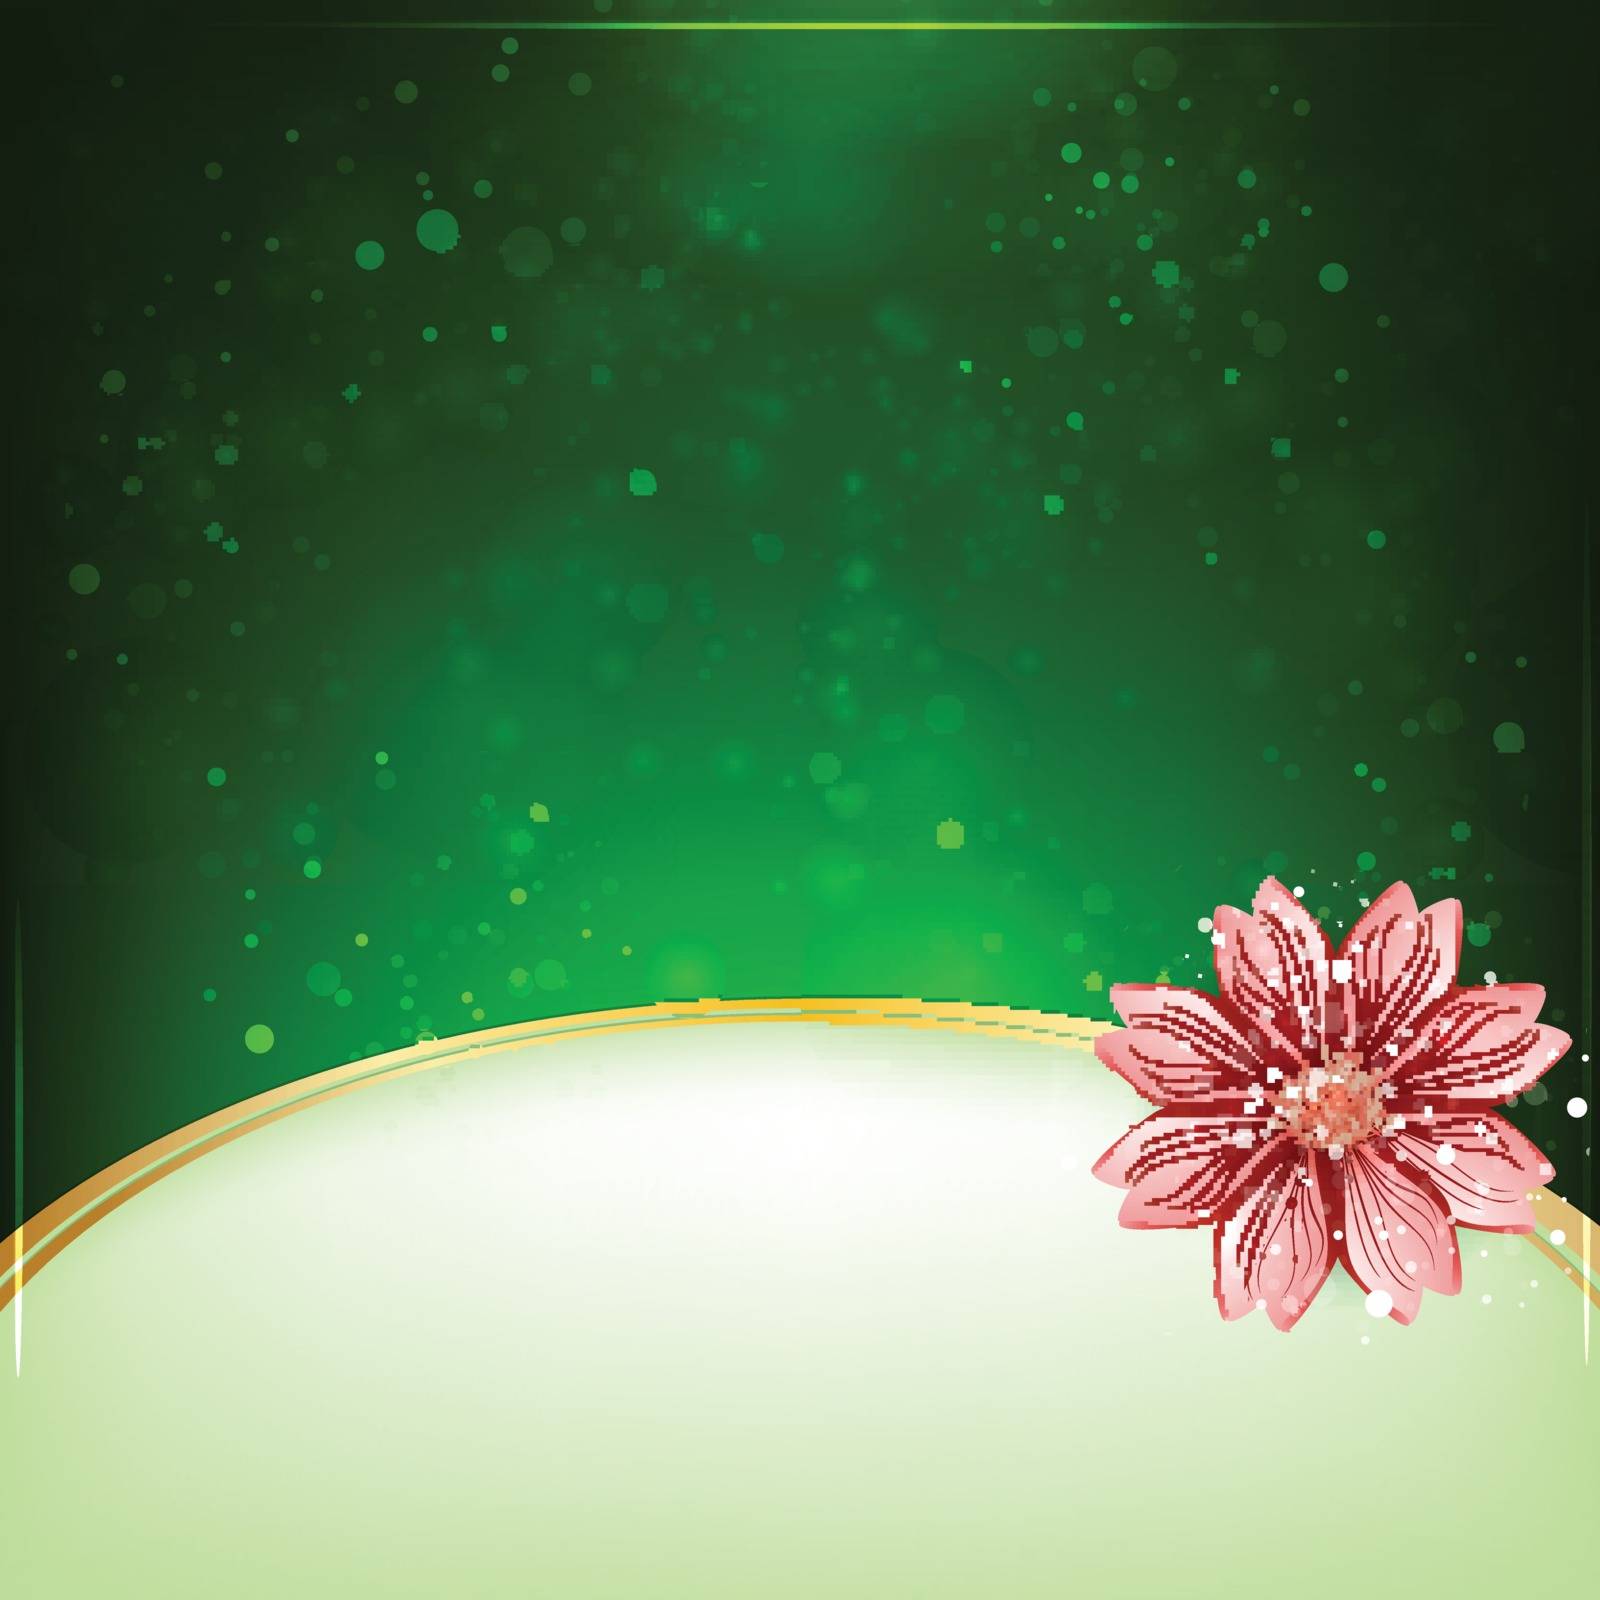 Flower background with space for text by maxmitzu